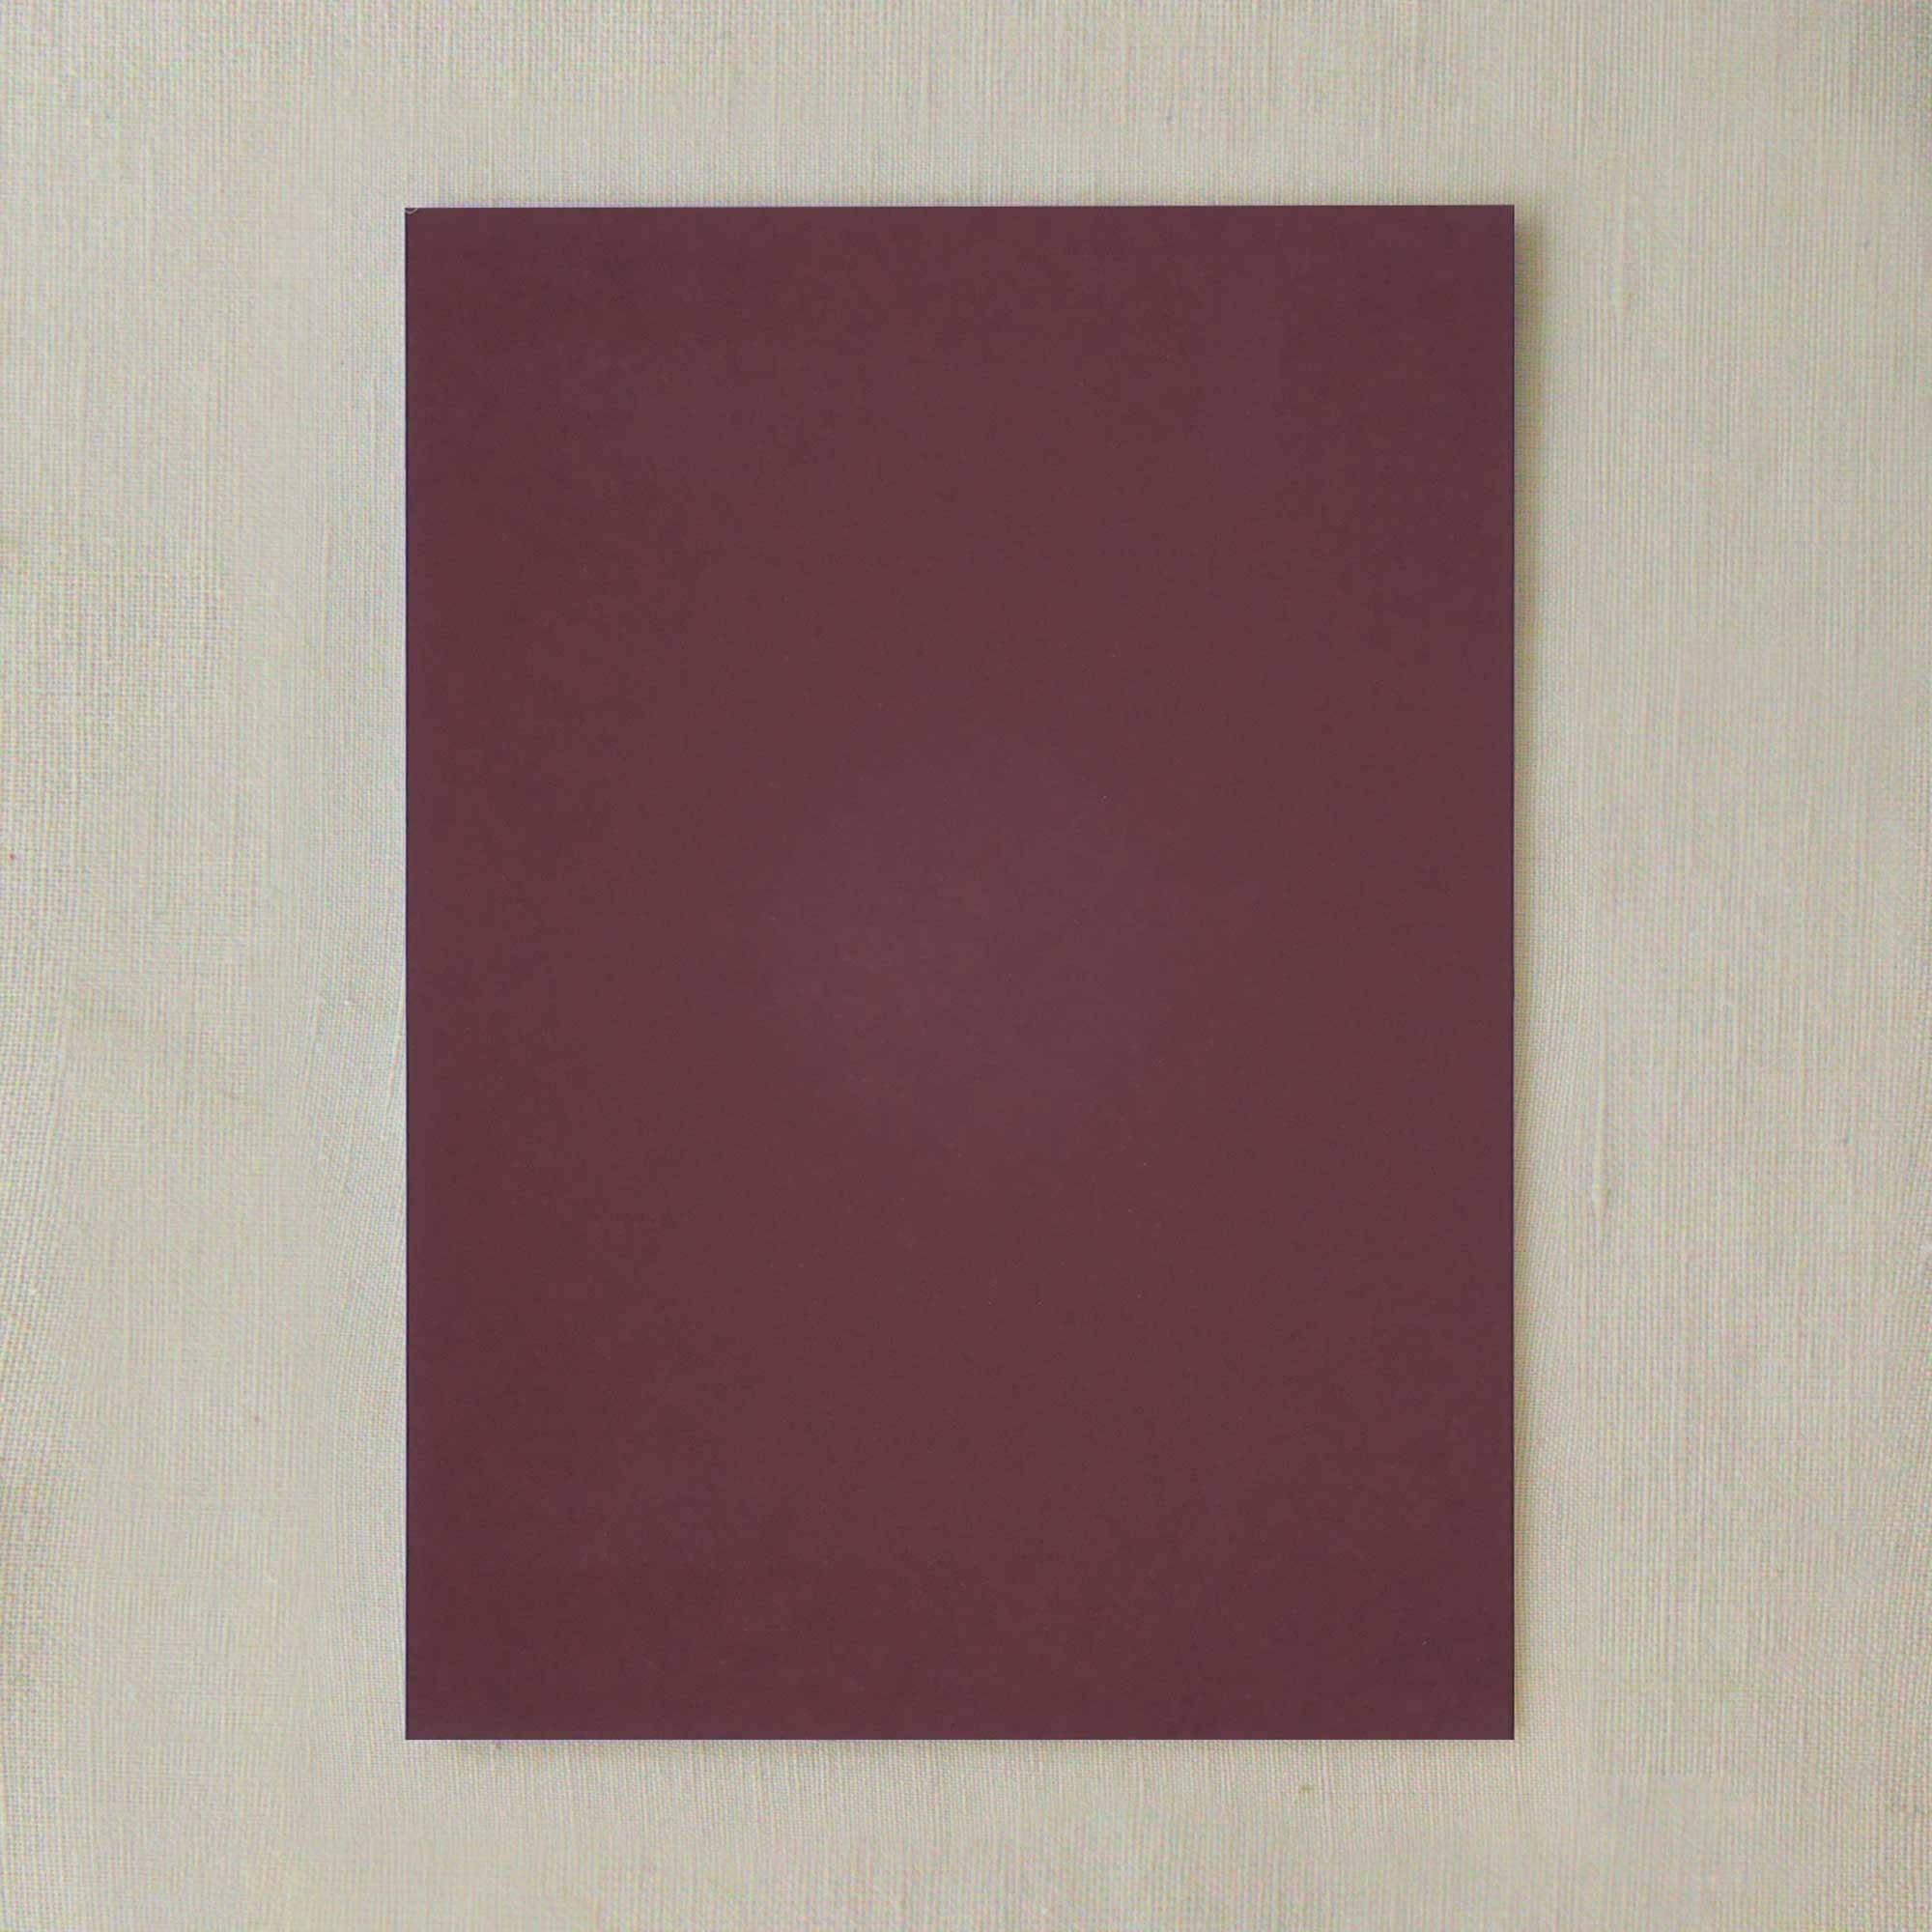 Cardstock Warehouse Paper Company Claret/Wine/Burgundy Red Cardstock Paper  - 8.5 x 11 inch Premium 100 lb. Cover - 25 Sheets from Cardstock Warehouse